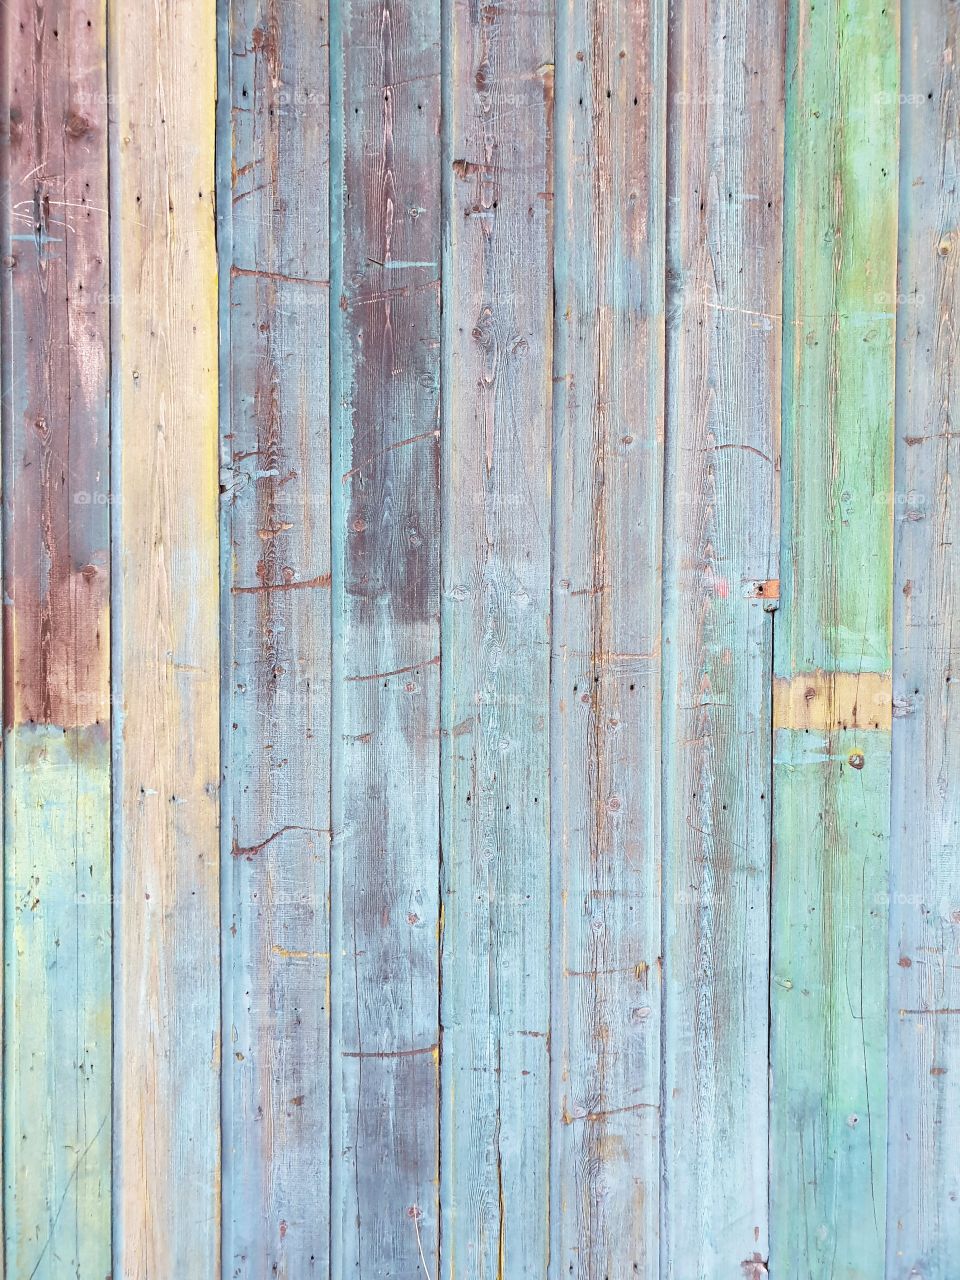 This was a wall of an old barn. Gorgeous colors and texture. I absolutely adore this photo and it would be great to use it as wallpaper.